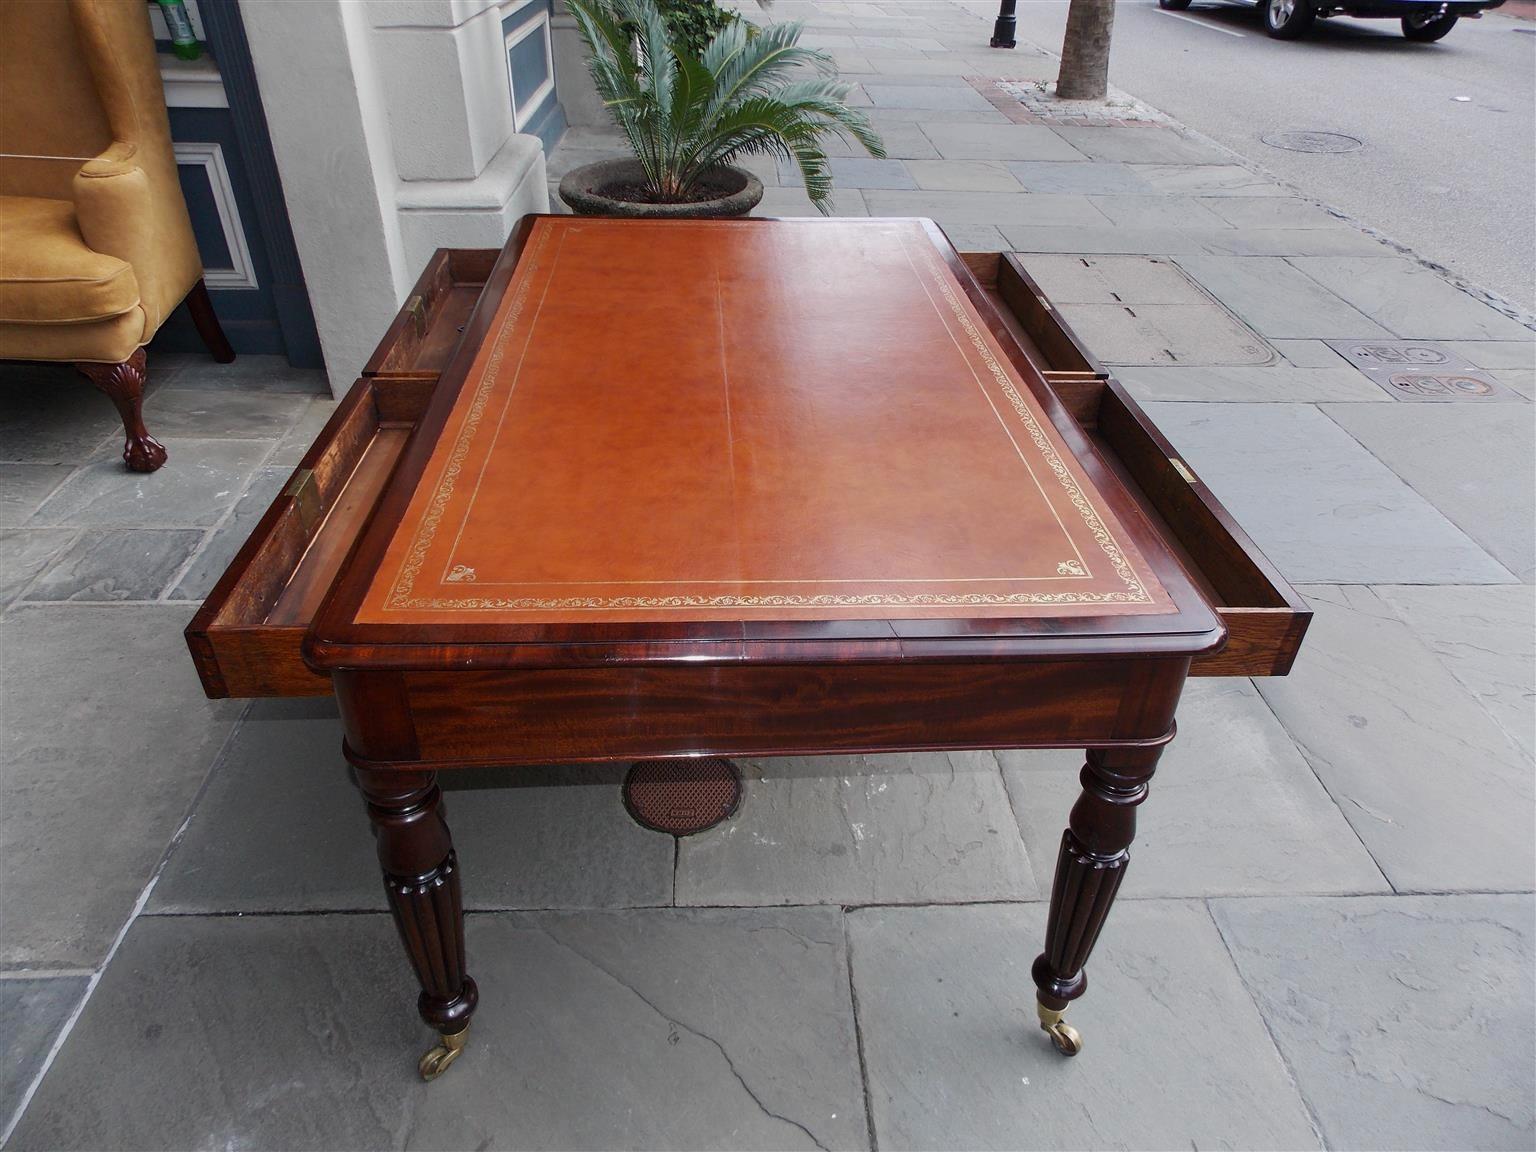 Early 19th Century English Mahogany Leather Top Four-Drawer Partners Desk on Casters, Circa 1820